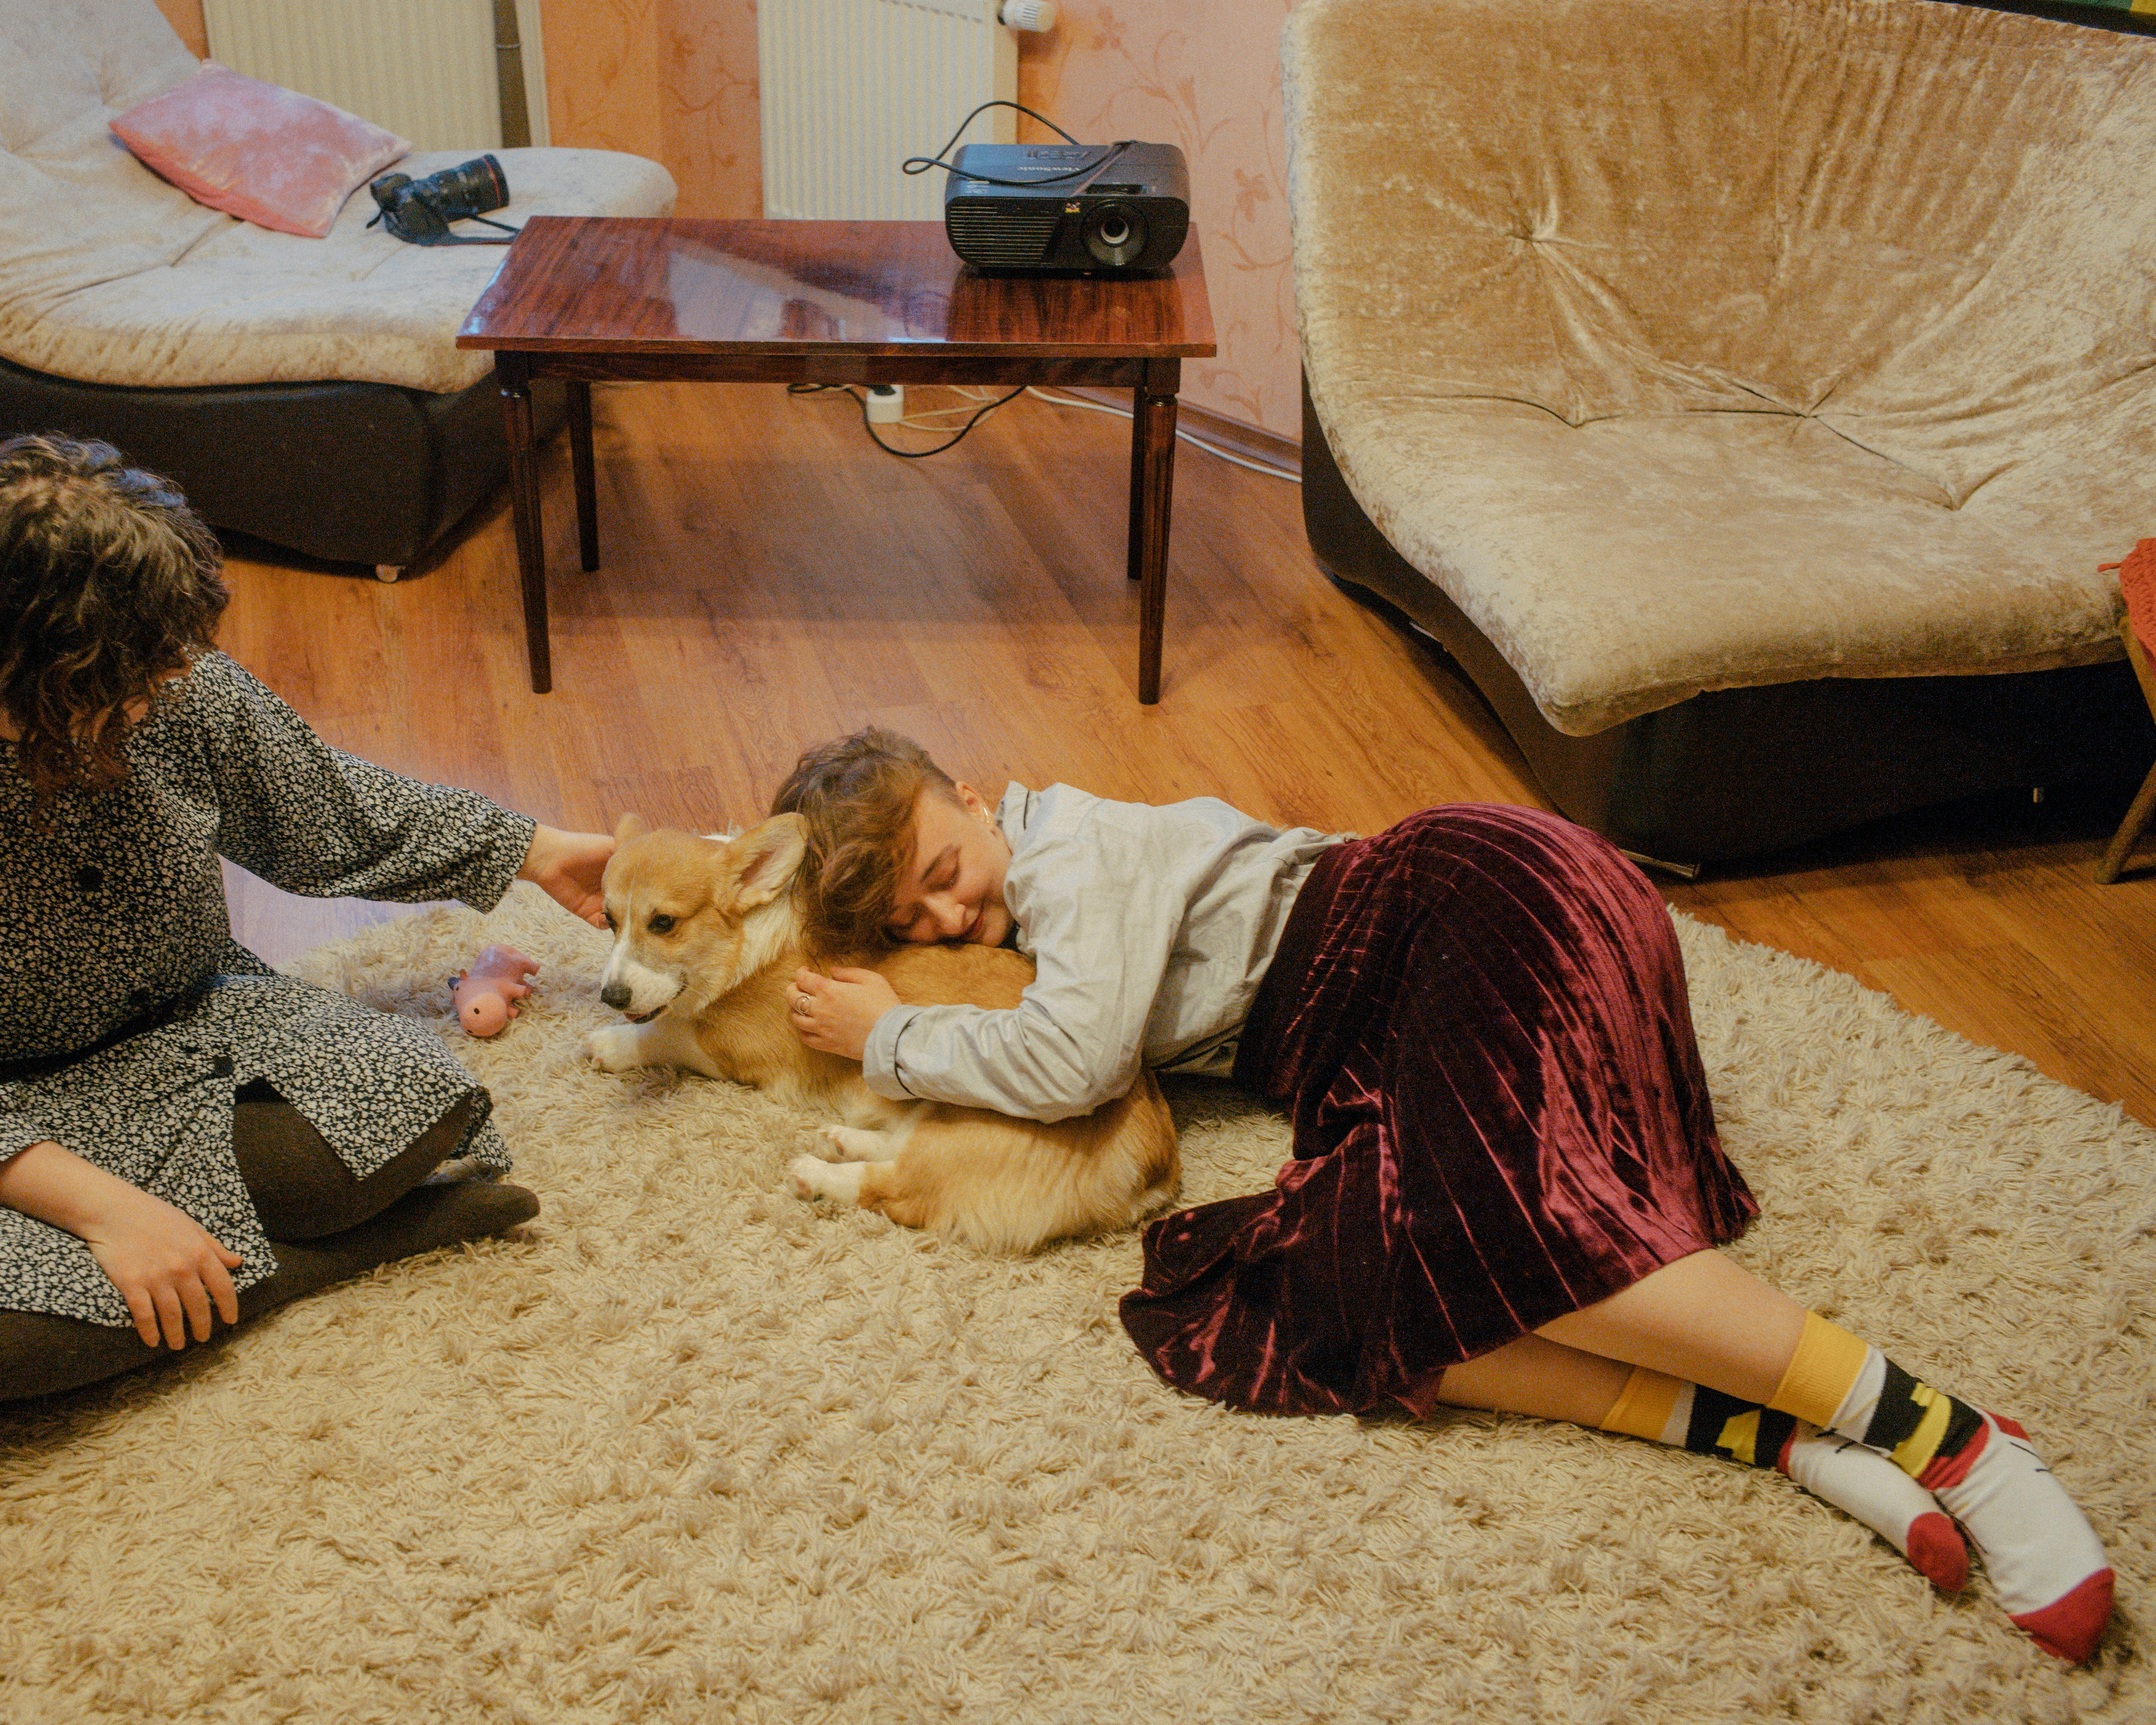 Daria Serenko, right, and Sonia Sno play with a corgi that belongs to a guest staying at Femdacha